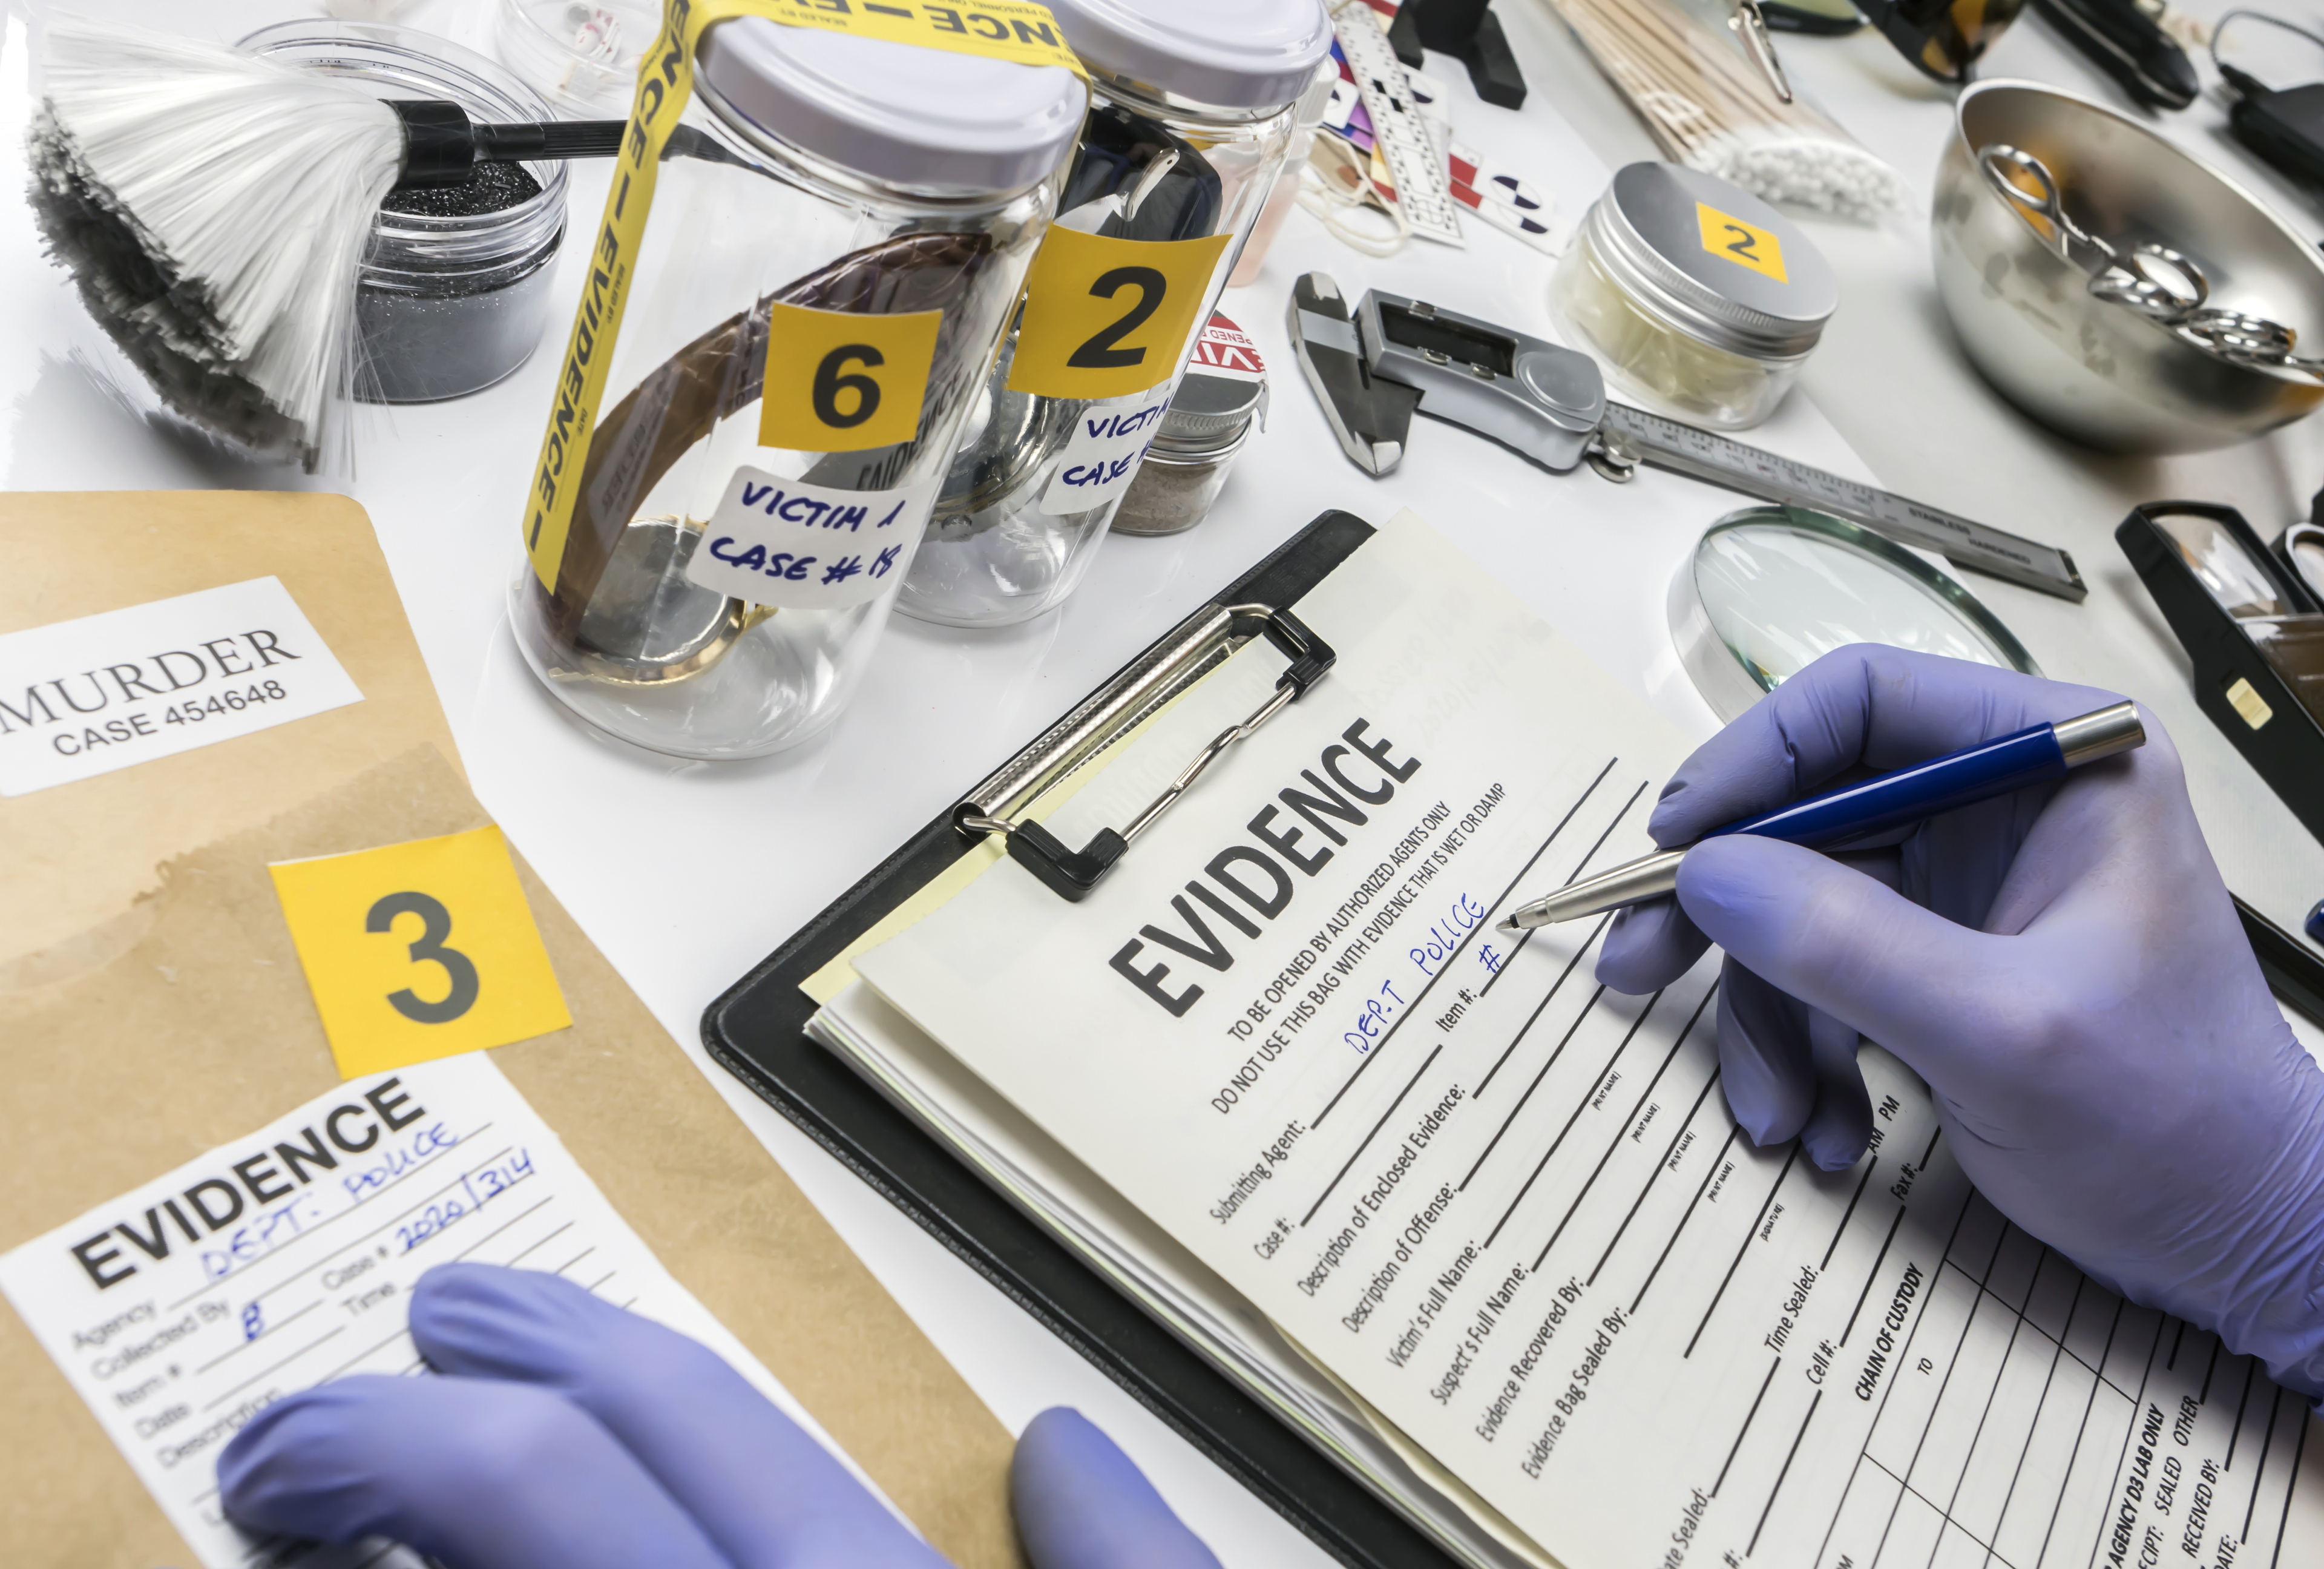 Specialized criminalistic police work in laboratory collecting data and evidence of a murder, conceptual image